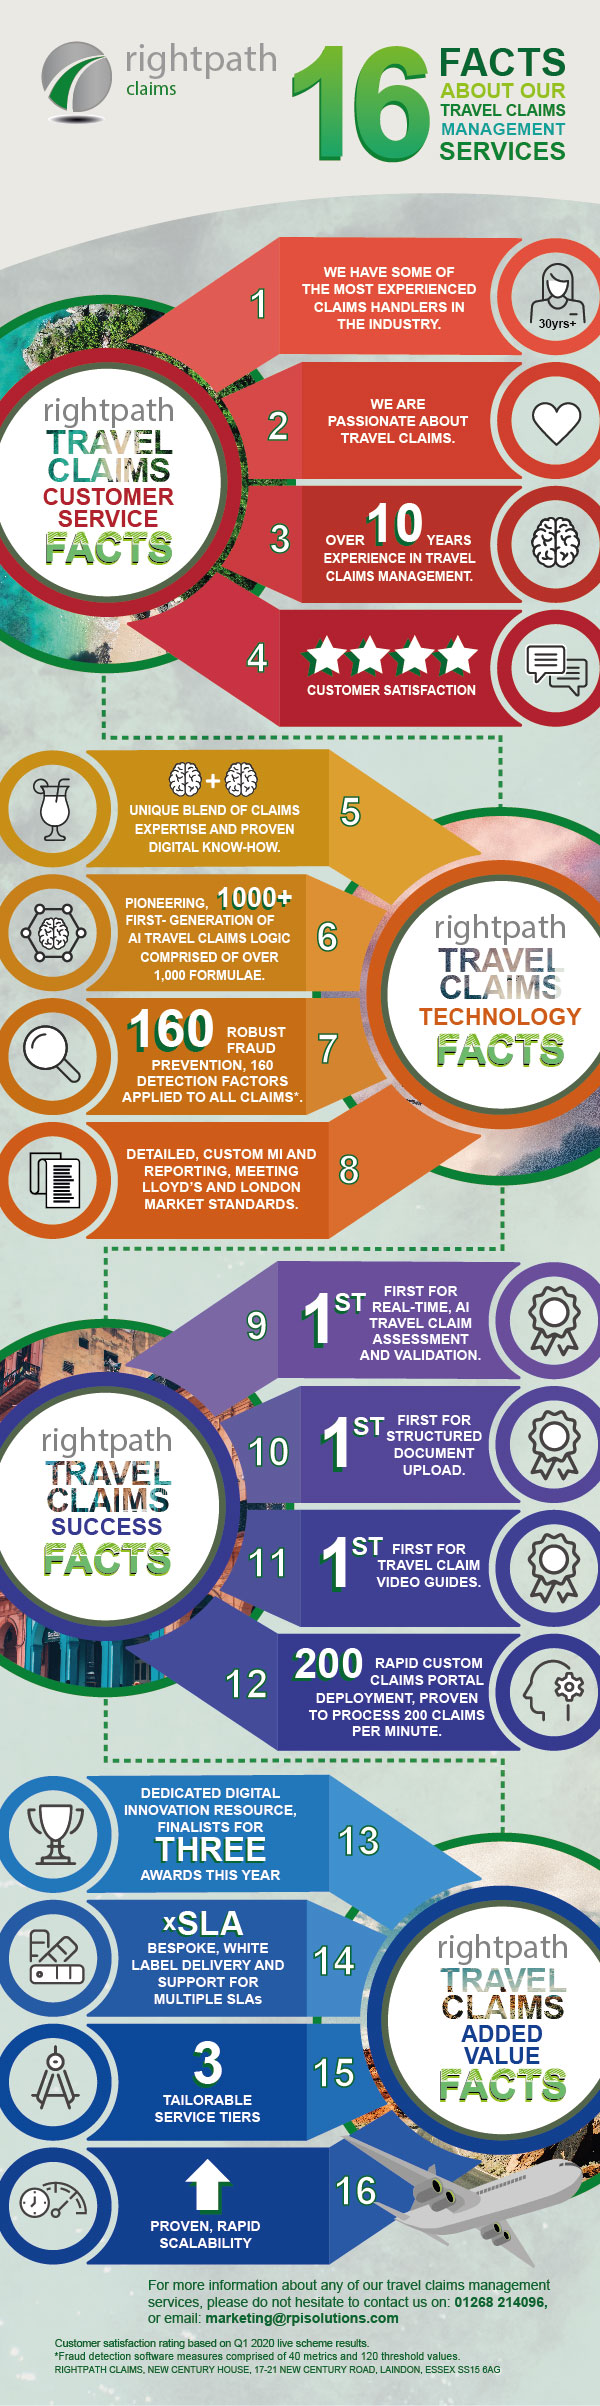 Sixteen facts about our travel claims management services - Infographic.